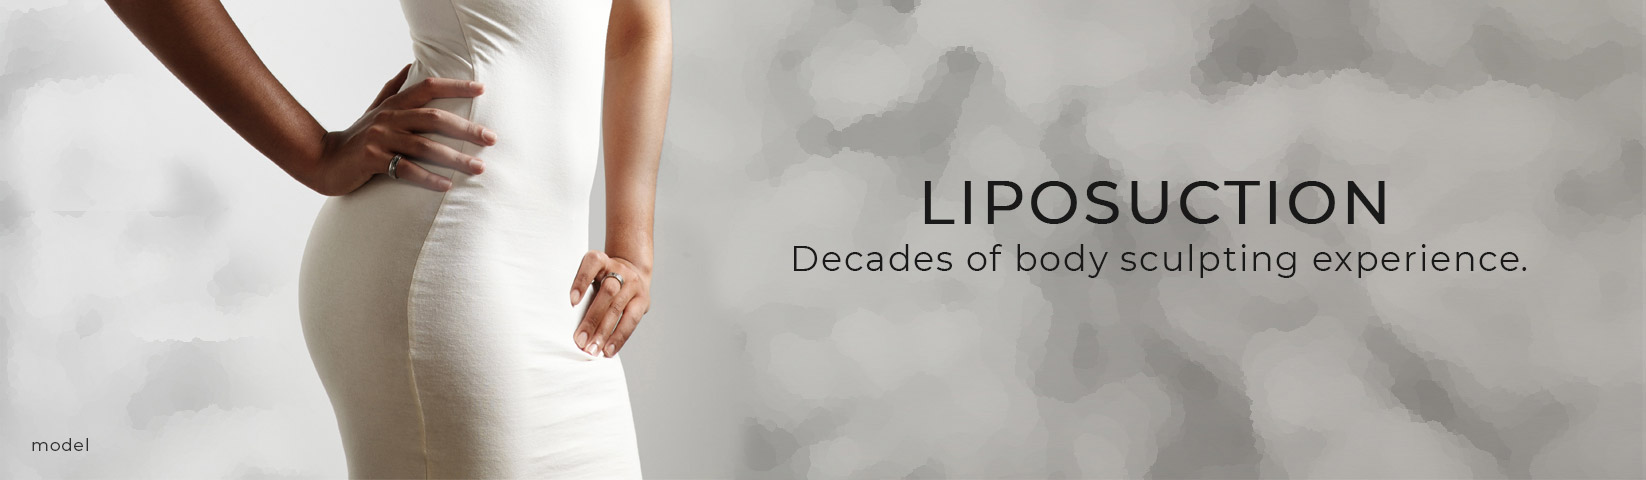 Liposuction: Decades of body sculpting experience